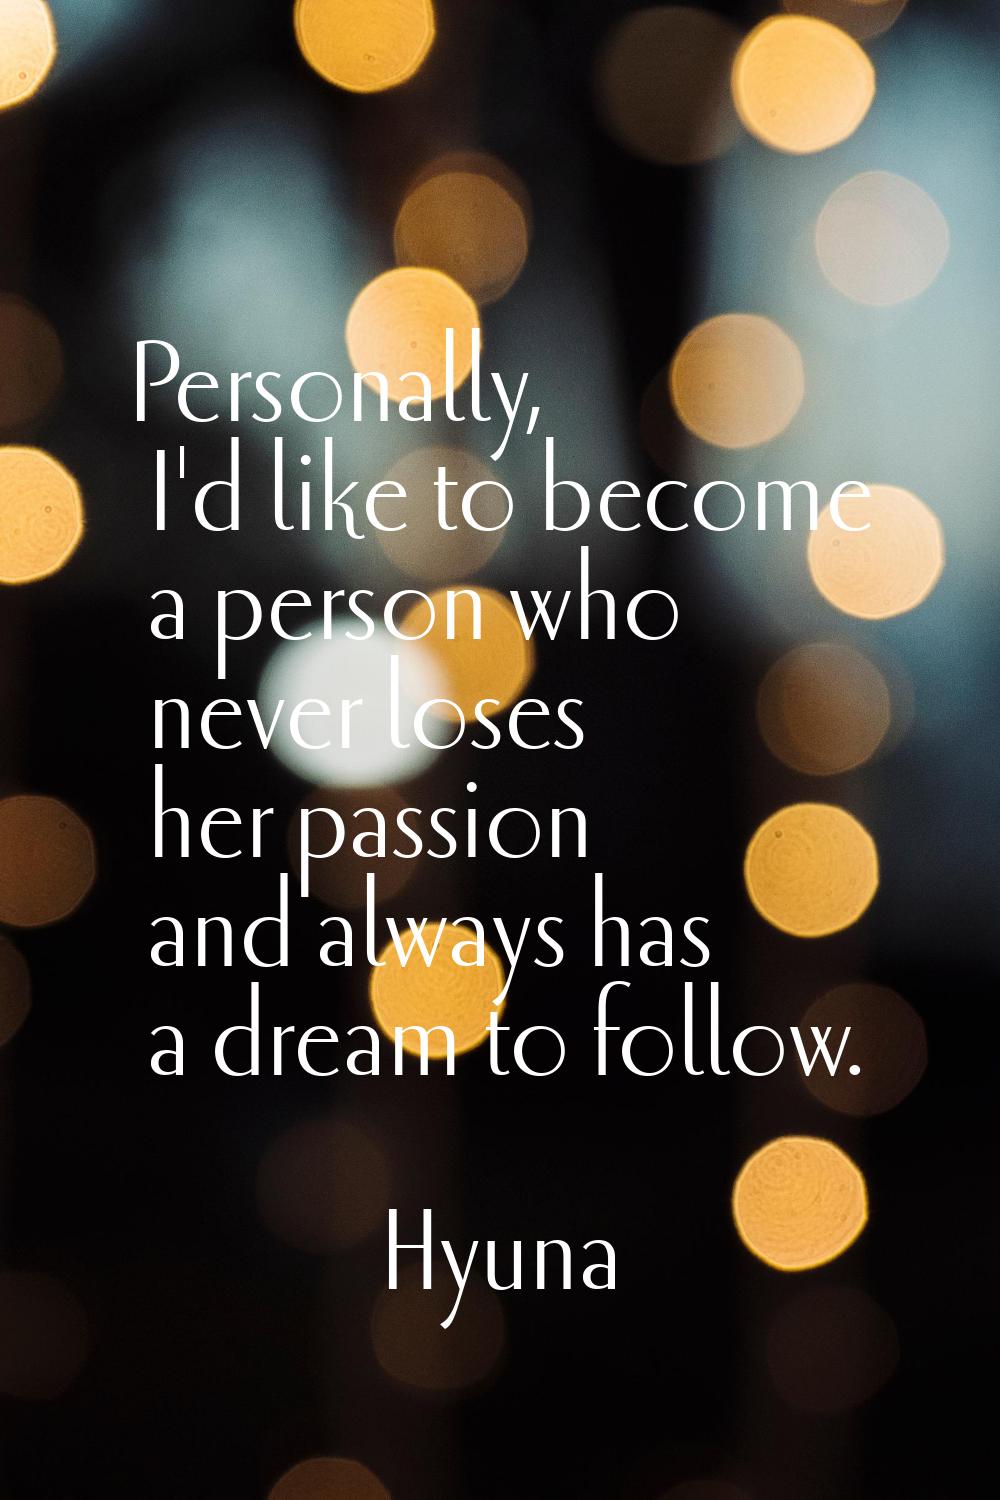 Personally, I'd like to become a person who never loses her passion and always has a dream to follo